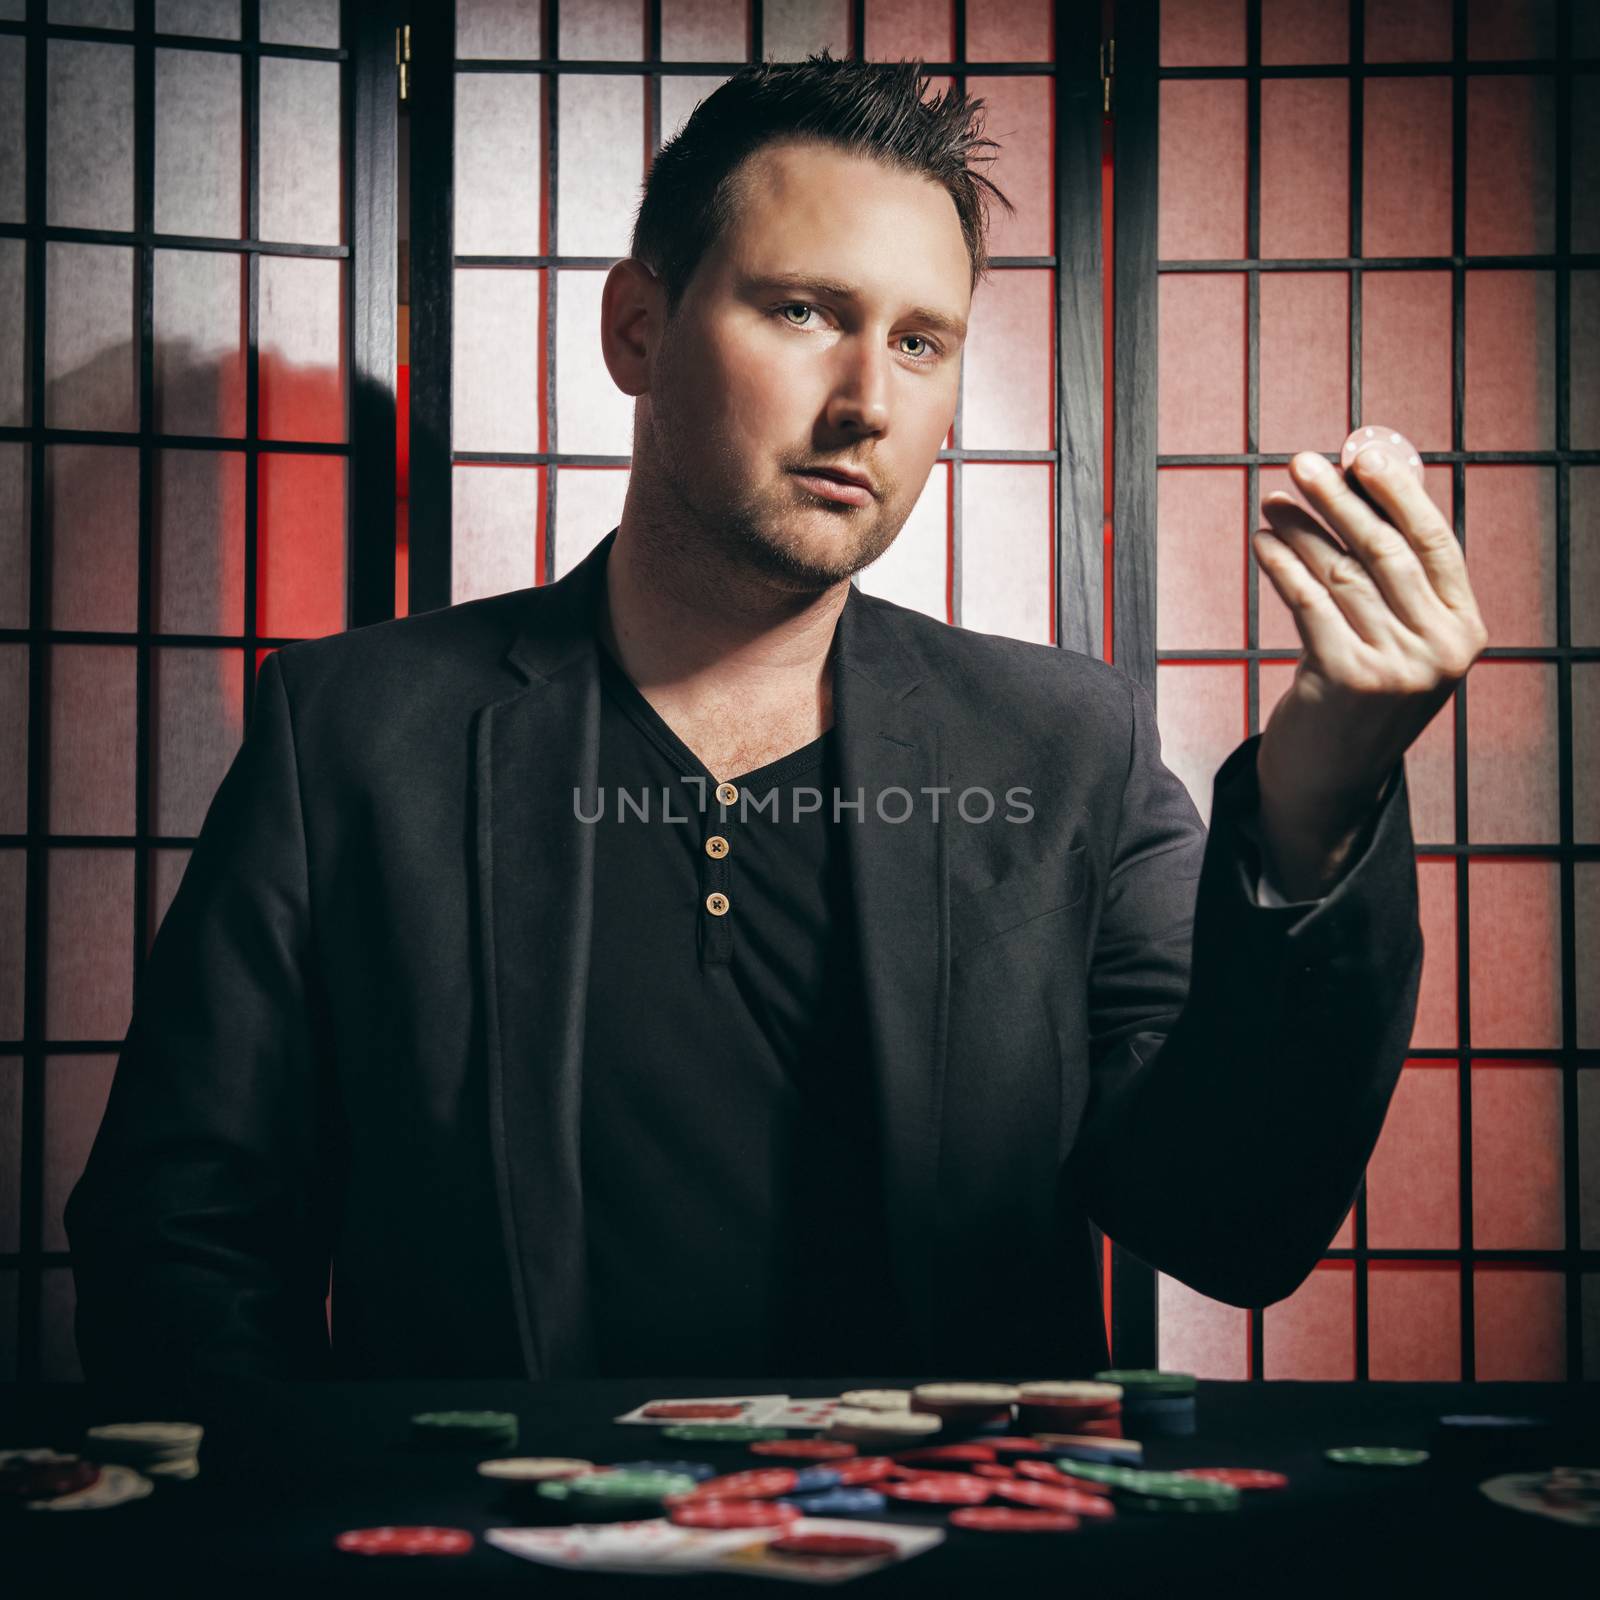 Concept: A high stakes poker player is winning big and feeling a little to confident against his opponents. He becomes overconfident and arrogant, showing of his chip stakes. Cinematic portrait.